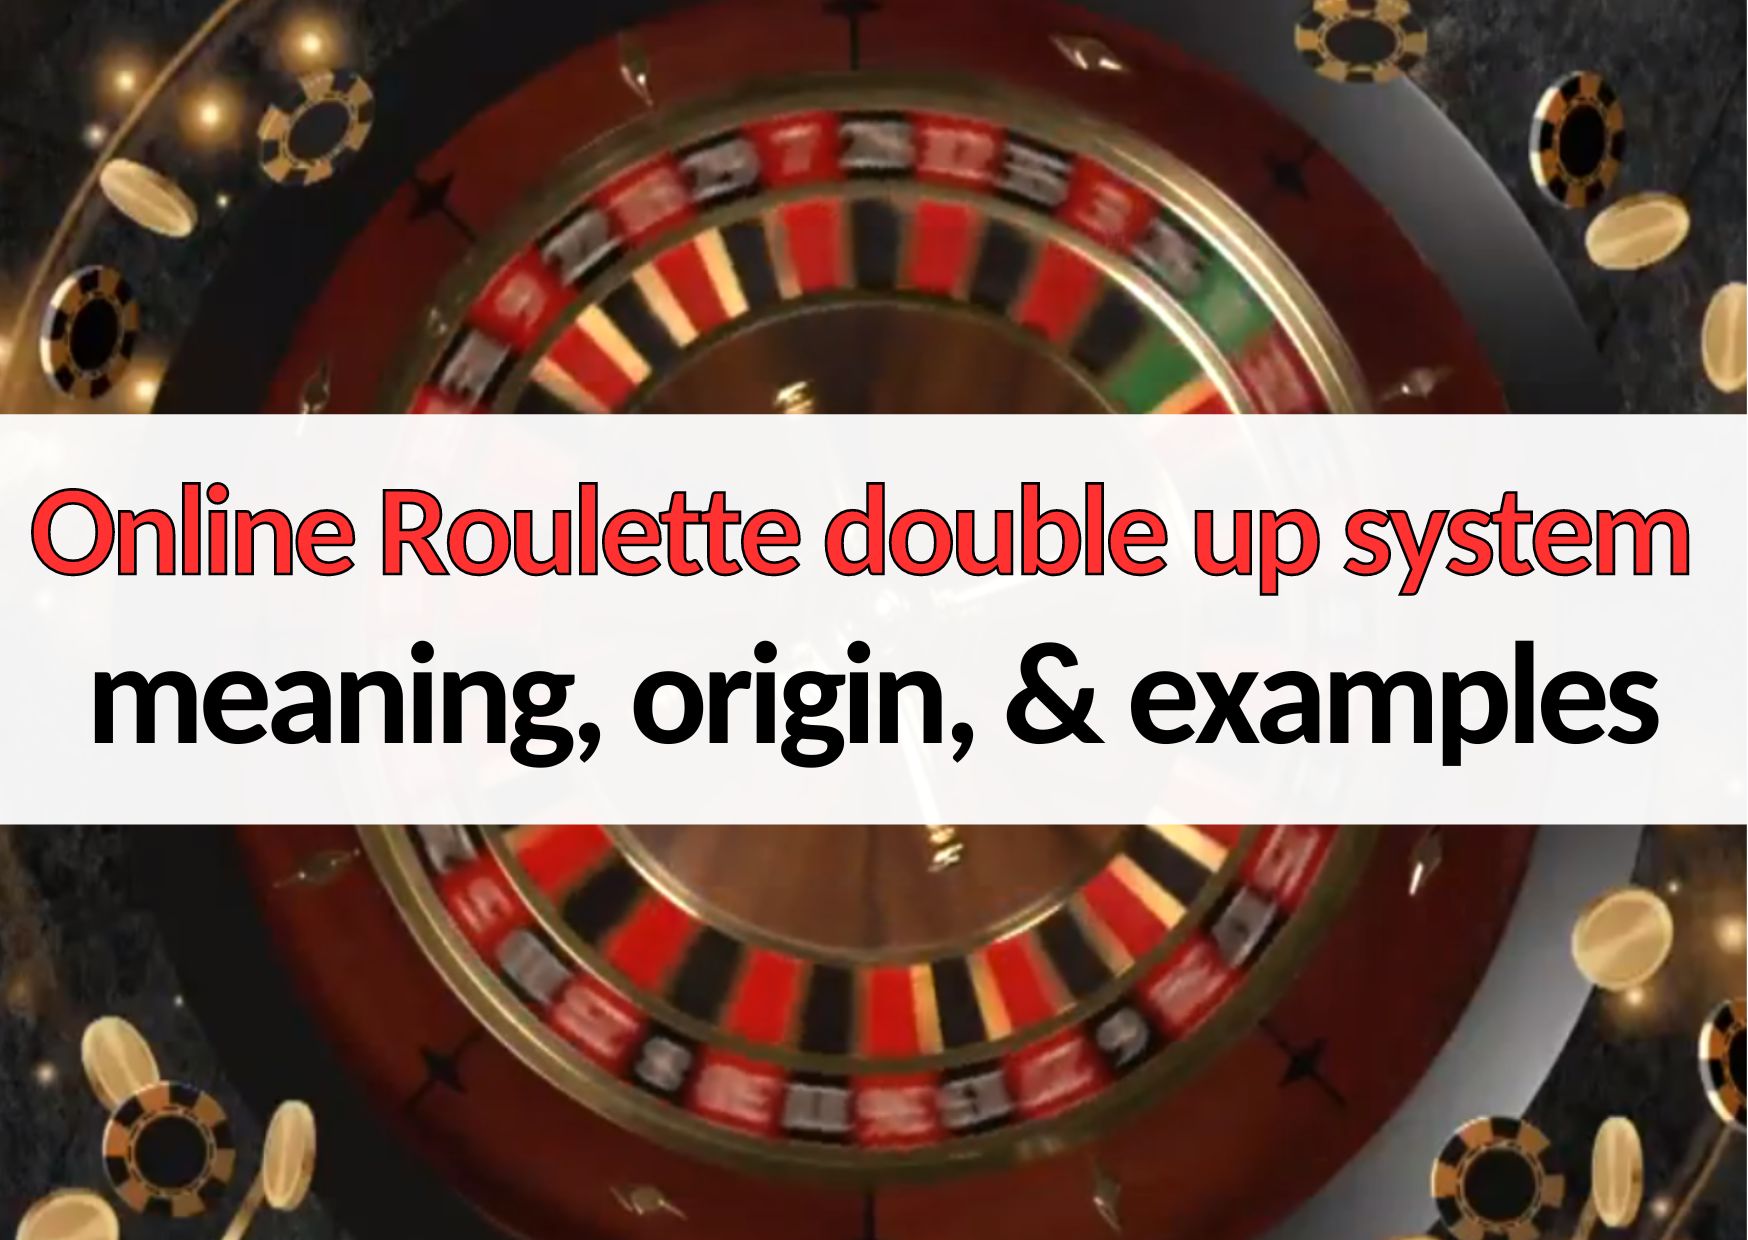 martingale online Roulette double up system